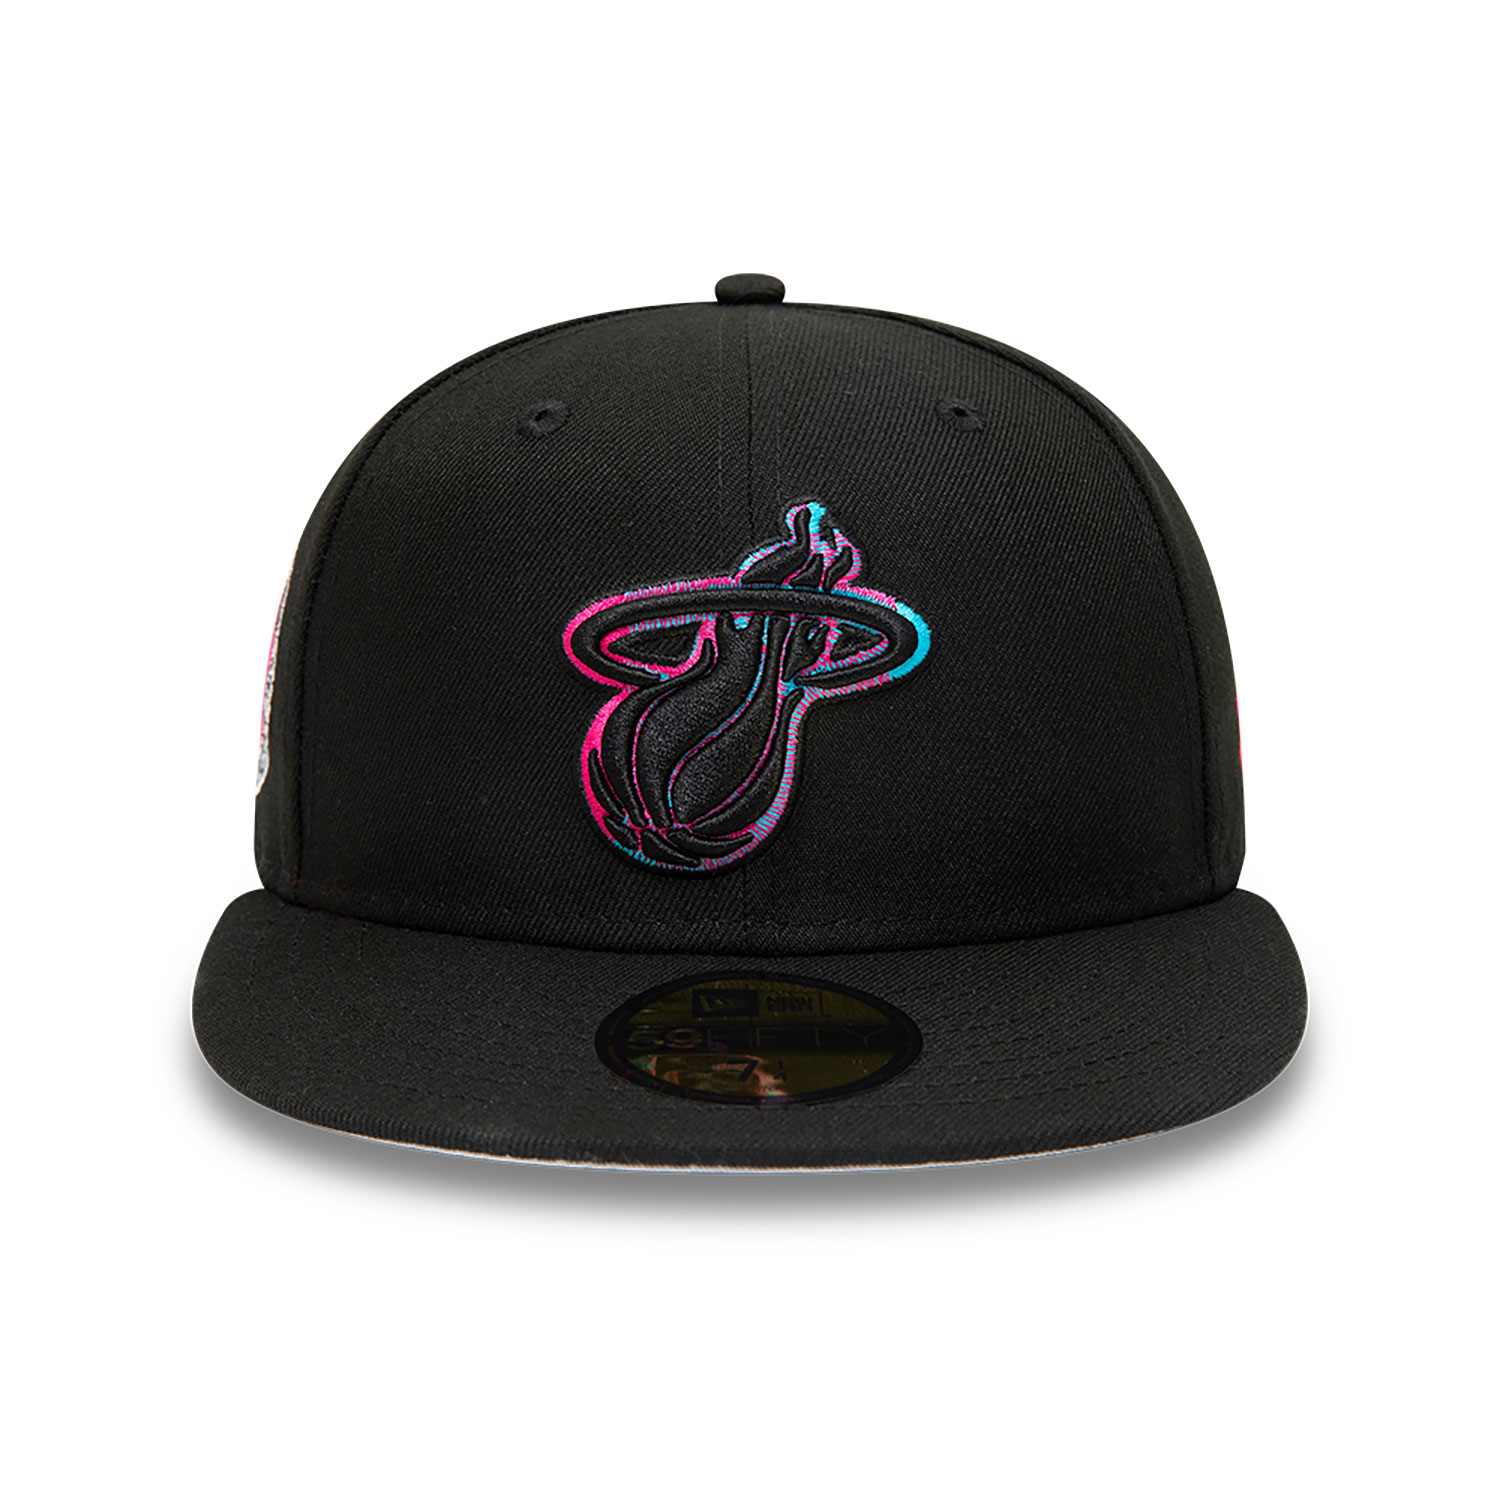 Official New Era Miami Heat NBA Black 59FIFTY Fitted Cap D03_586 | New ...